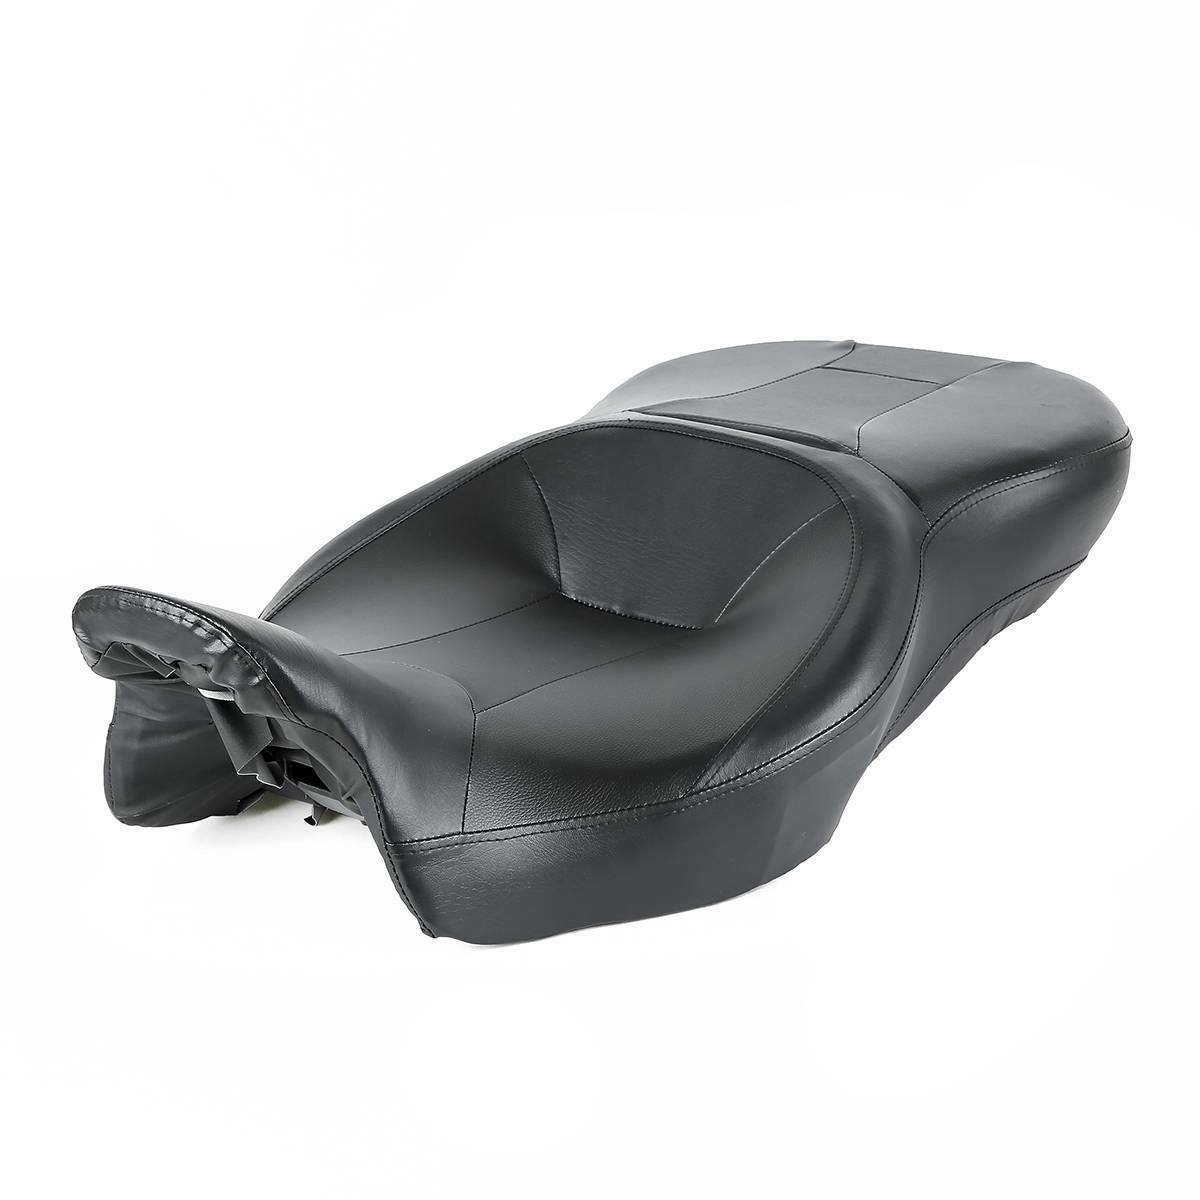 Rider Passenger Seat For Harley CVO Electra Tri Glide FLHT FLHR 2009-2022 19 18 - Moto Life Products